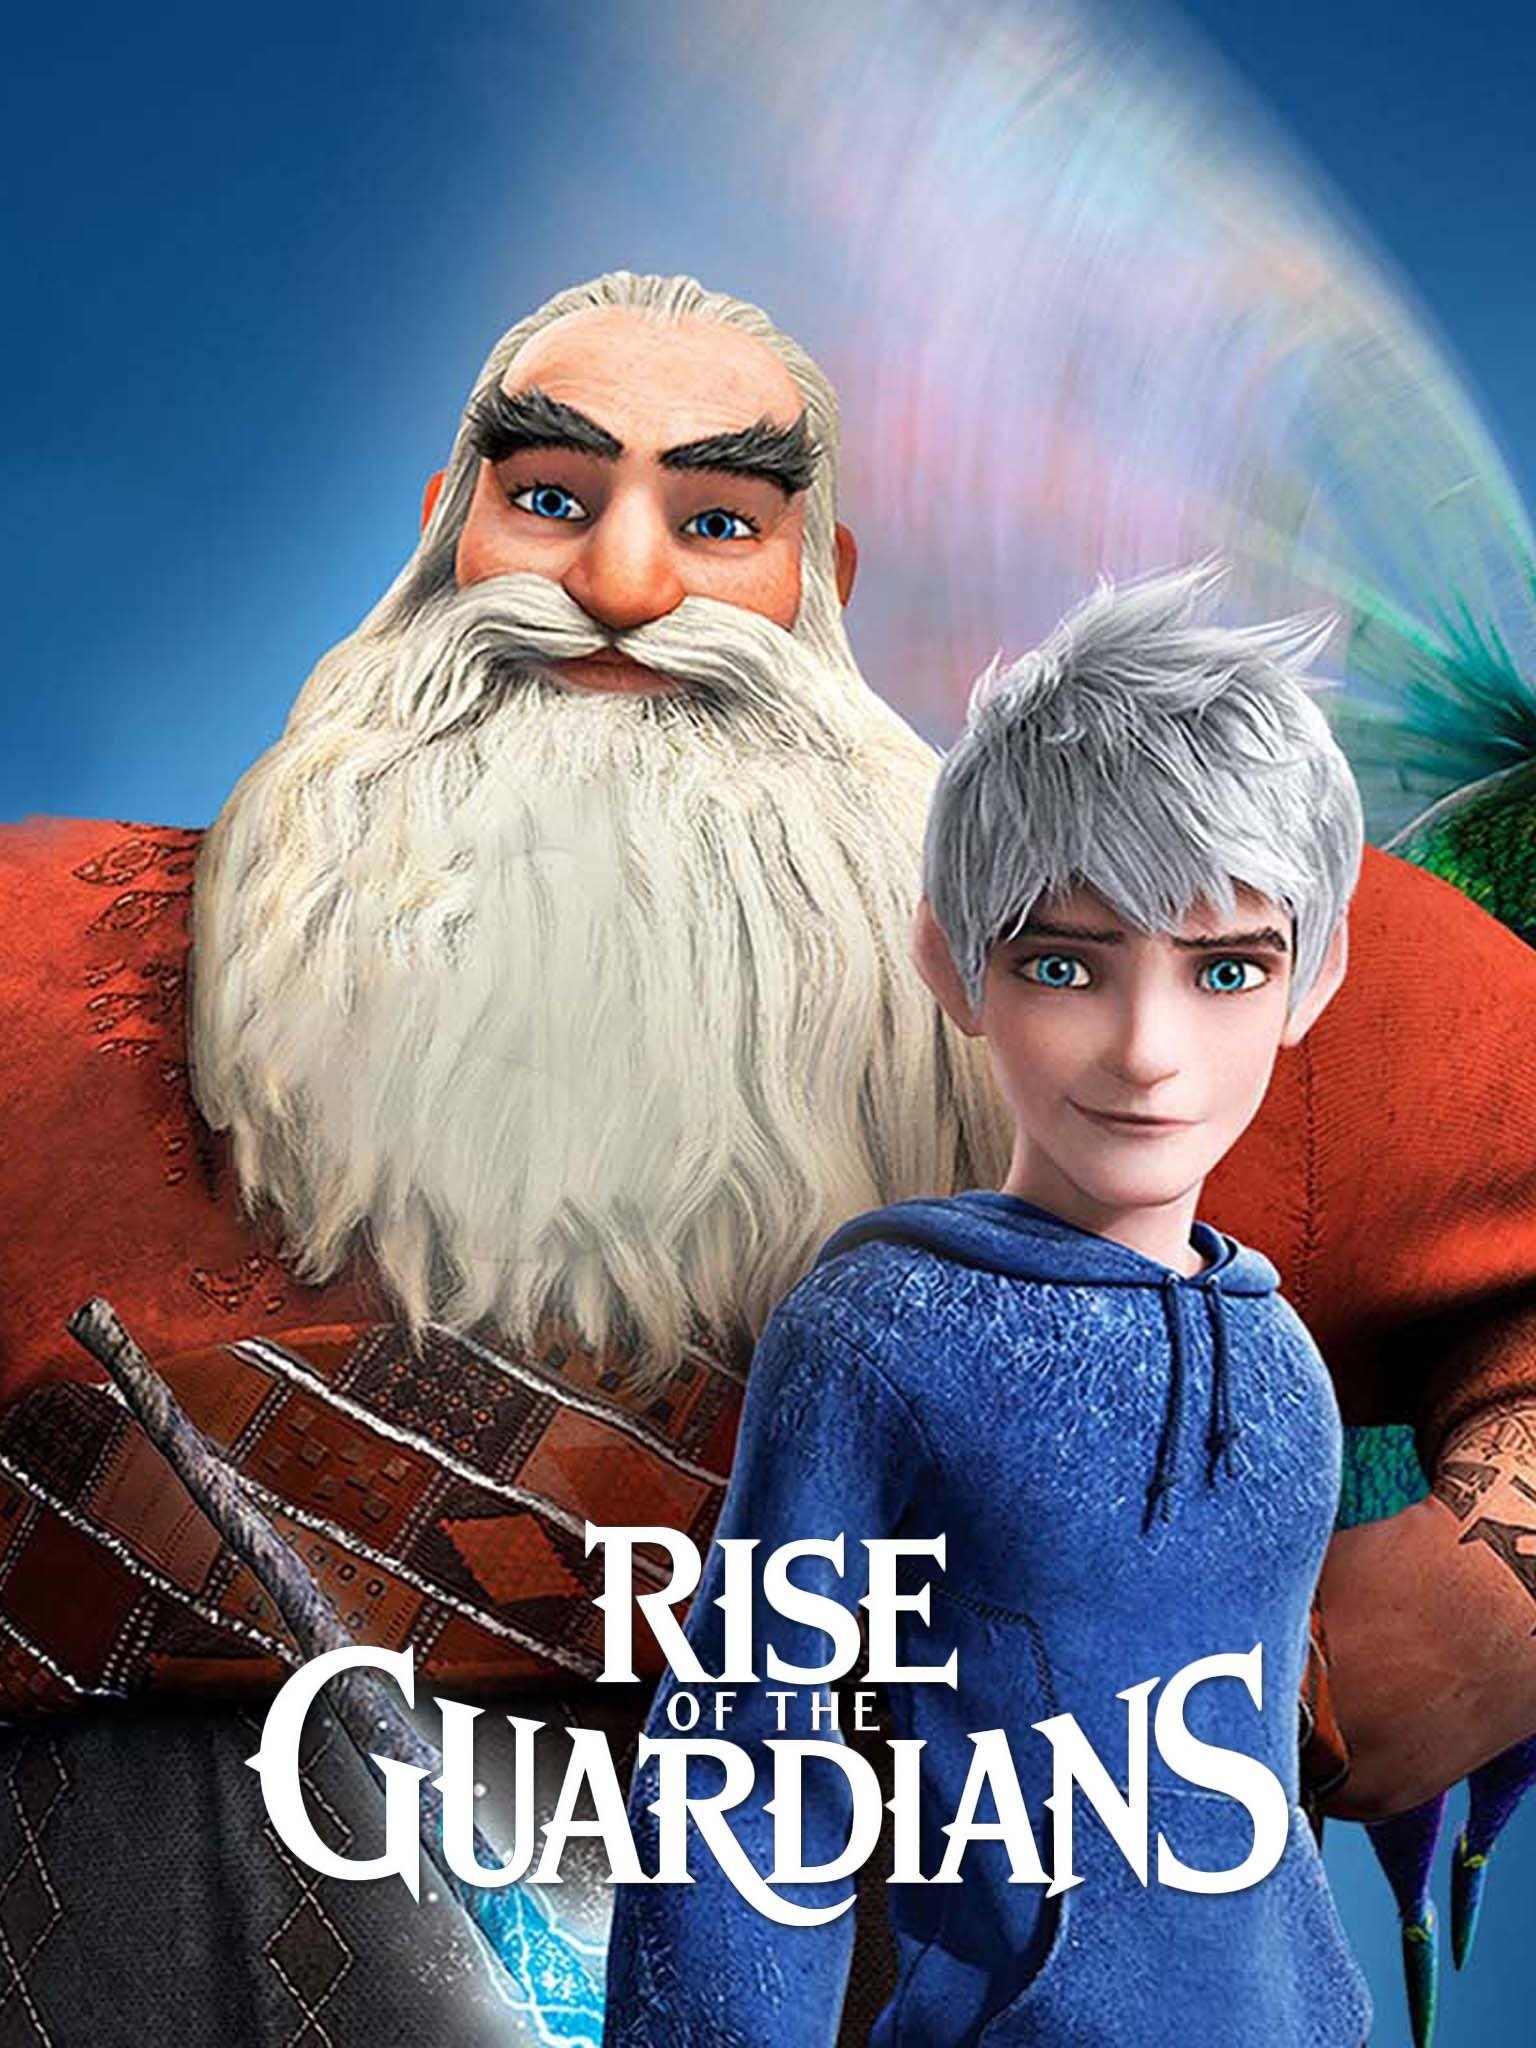 Rise of the Guardians - Rotten Tomatoes